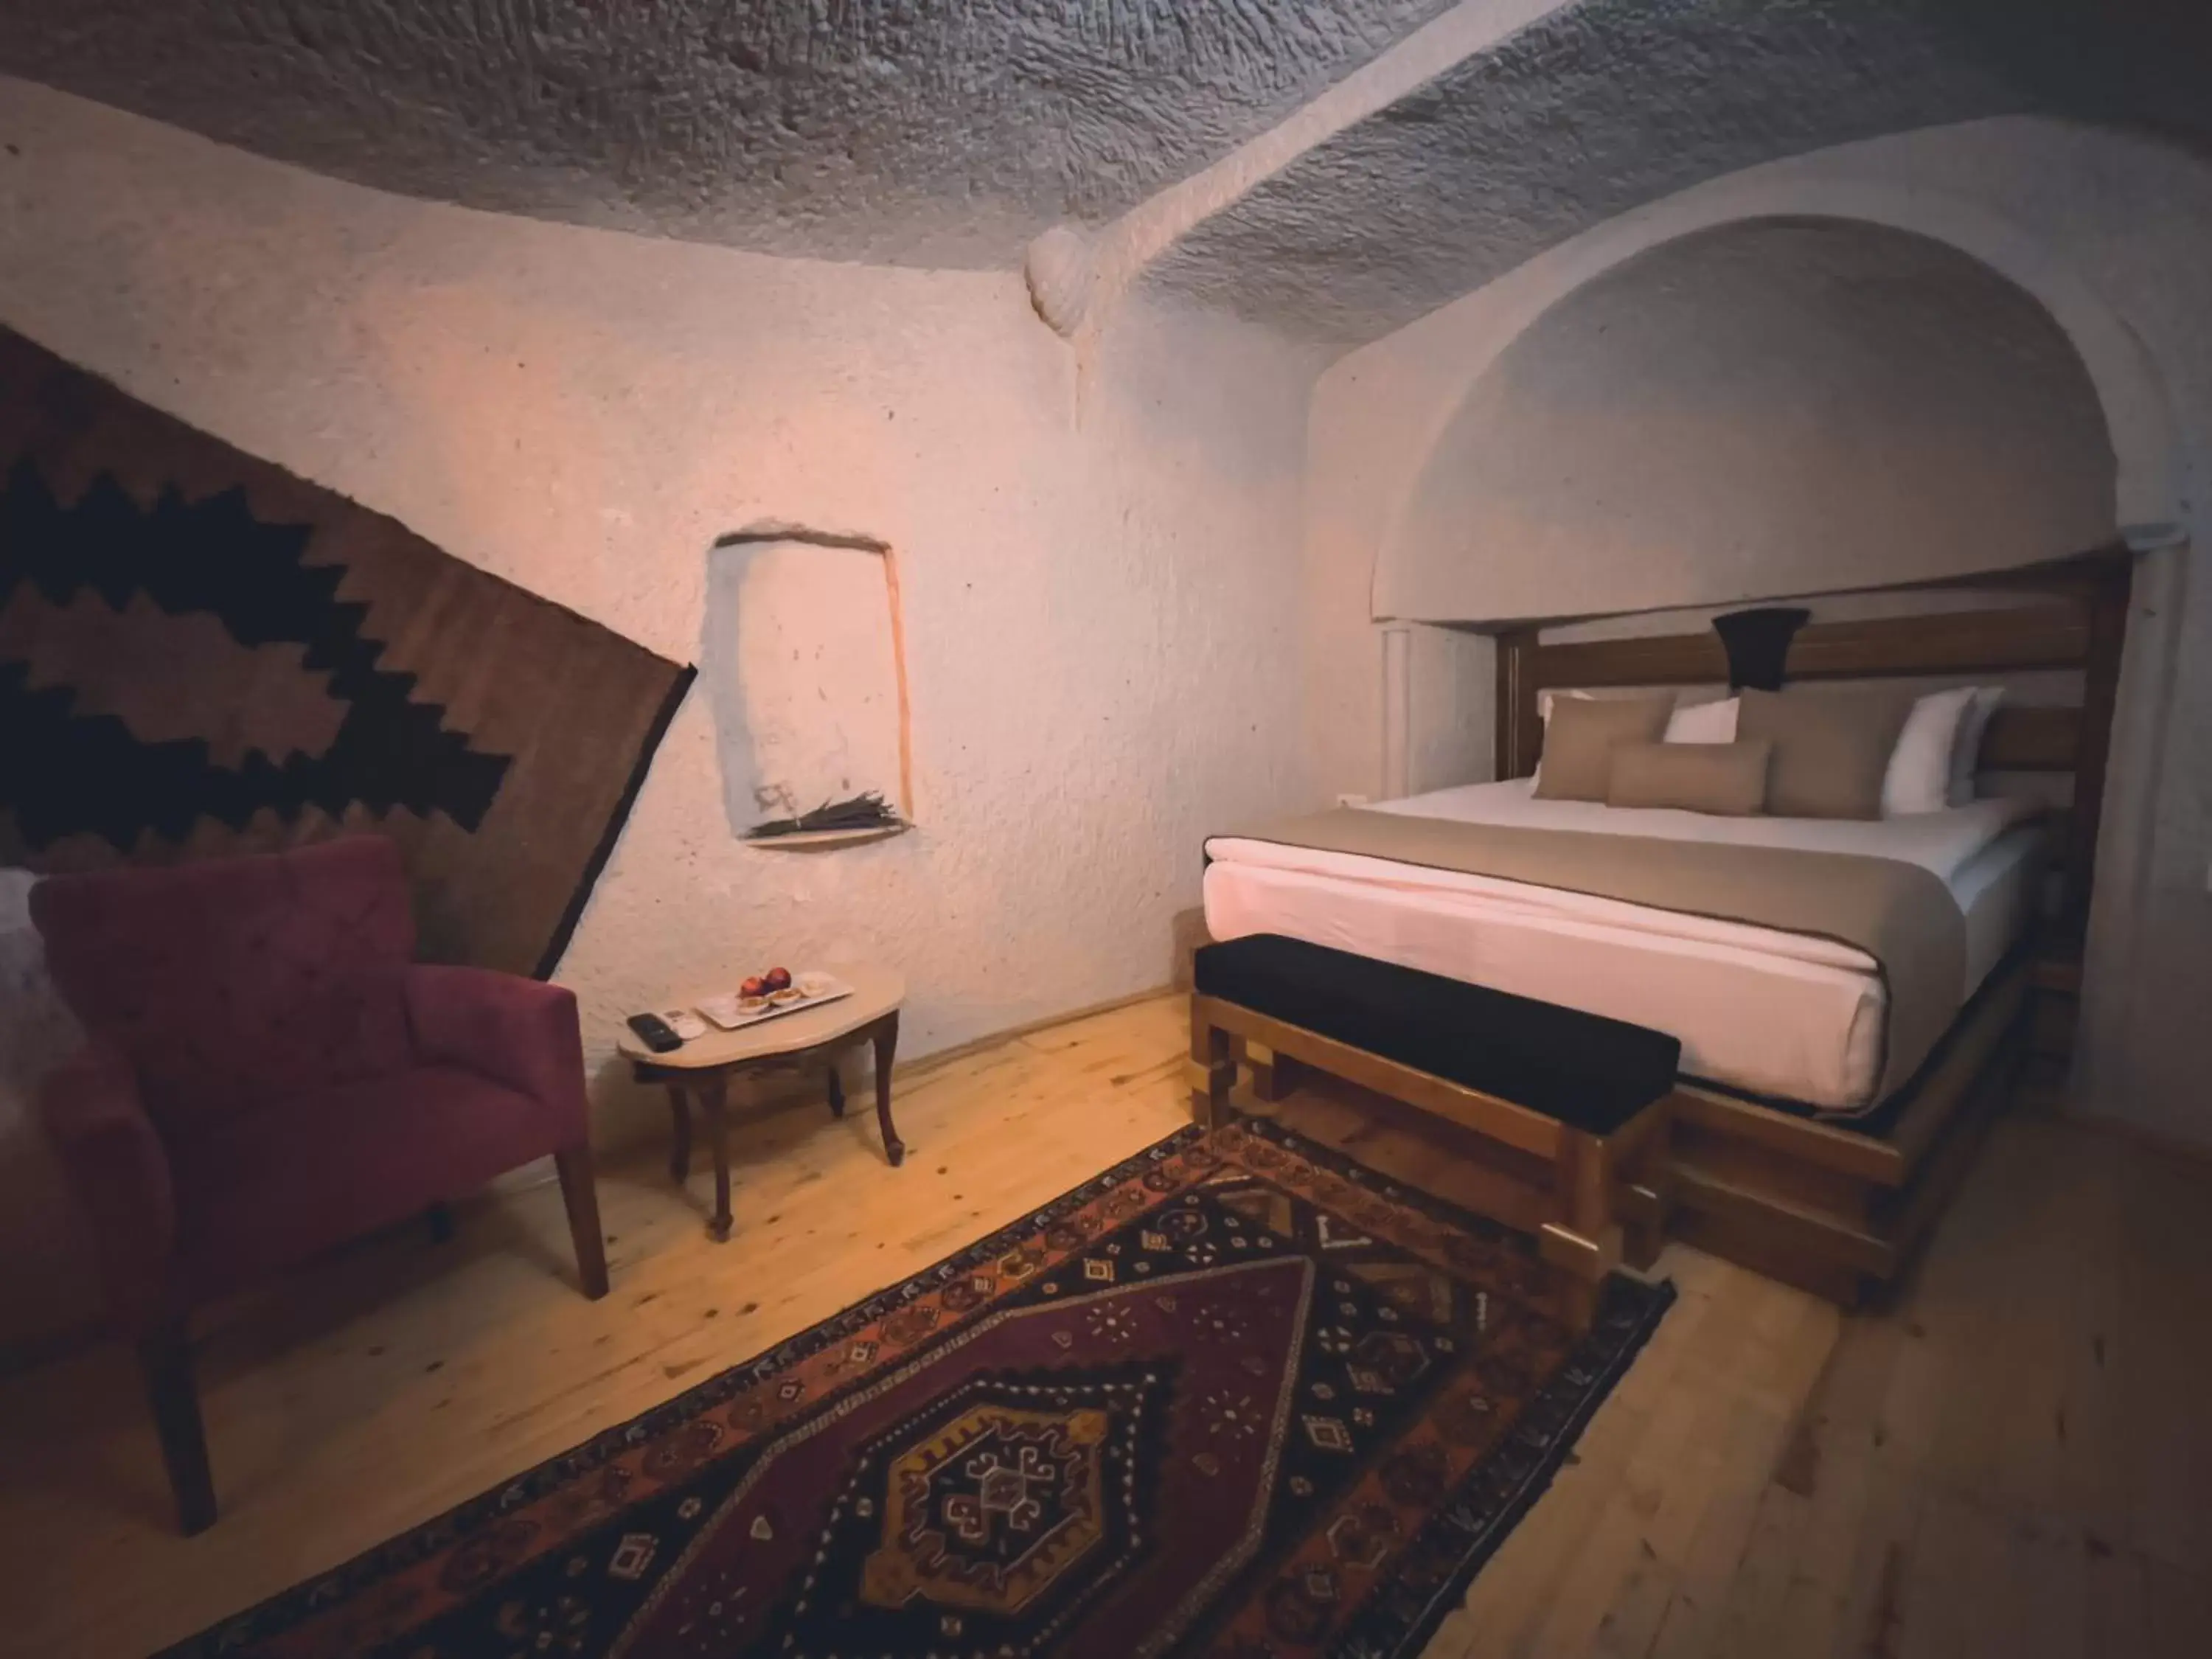 Bed in Local Cave House Hotel